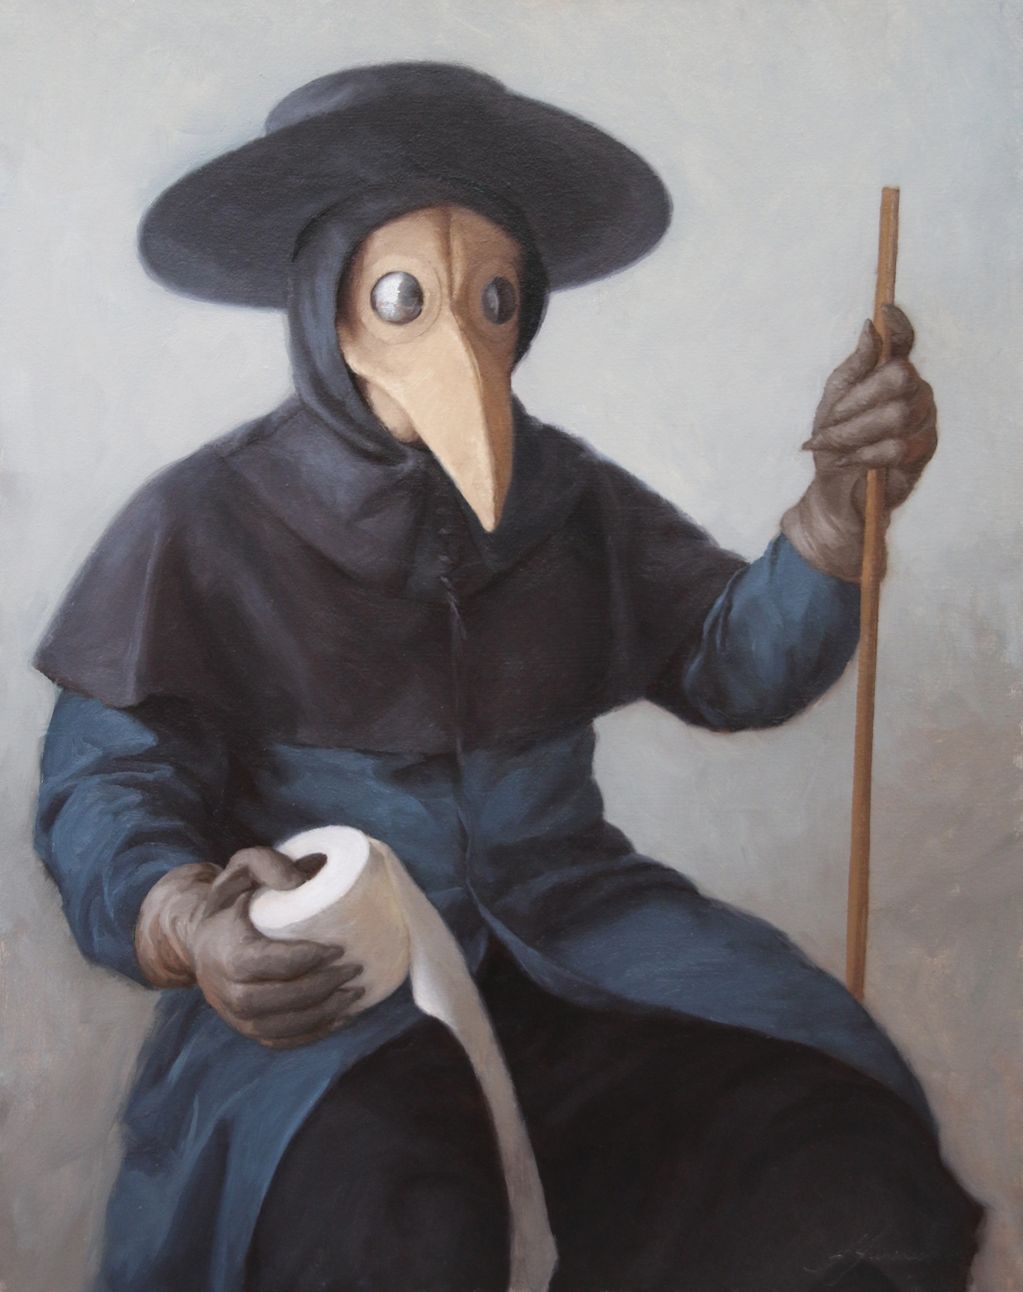 Plague doctor holding toilet paper and a stick 